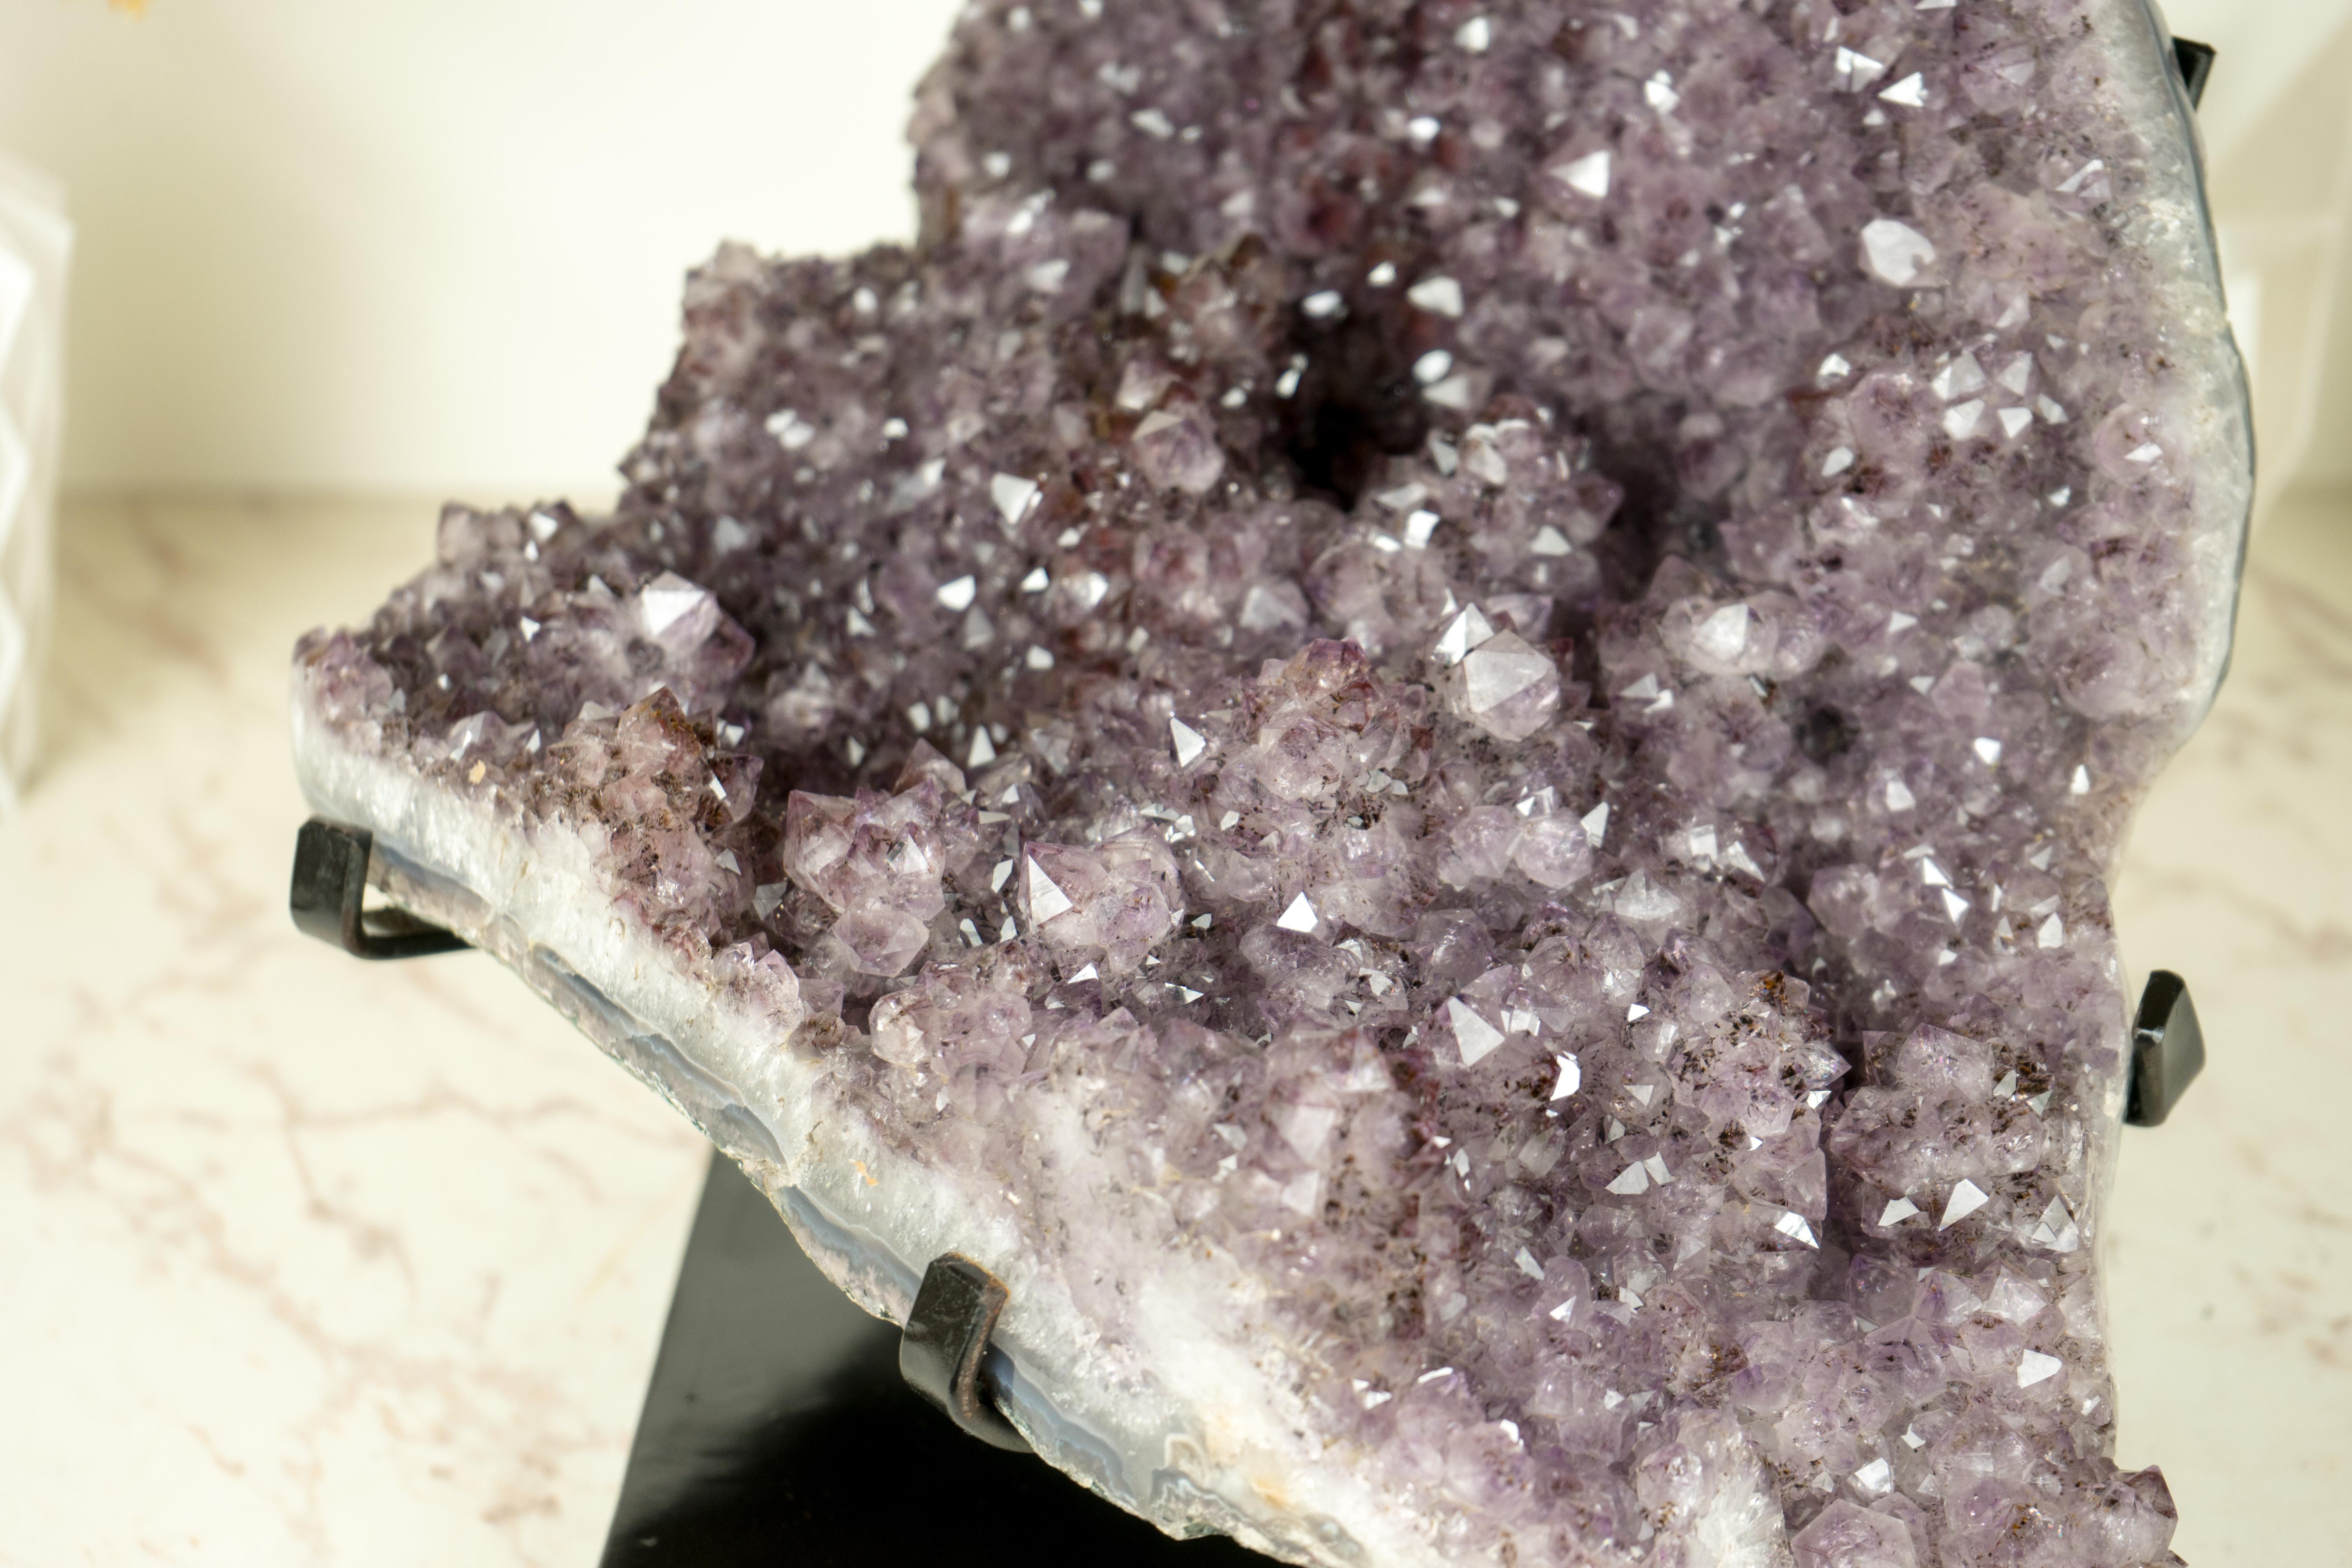 Natural Amethyst with Large Stalactite Formations covered by Intact Lavender Purple Druzy with Goethite 

▫️ Description

An incredible Amethyst specimen showcasing dozens of perfectly intact Amethyst Stalactites and gorgeous aesthetics, this